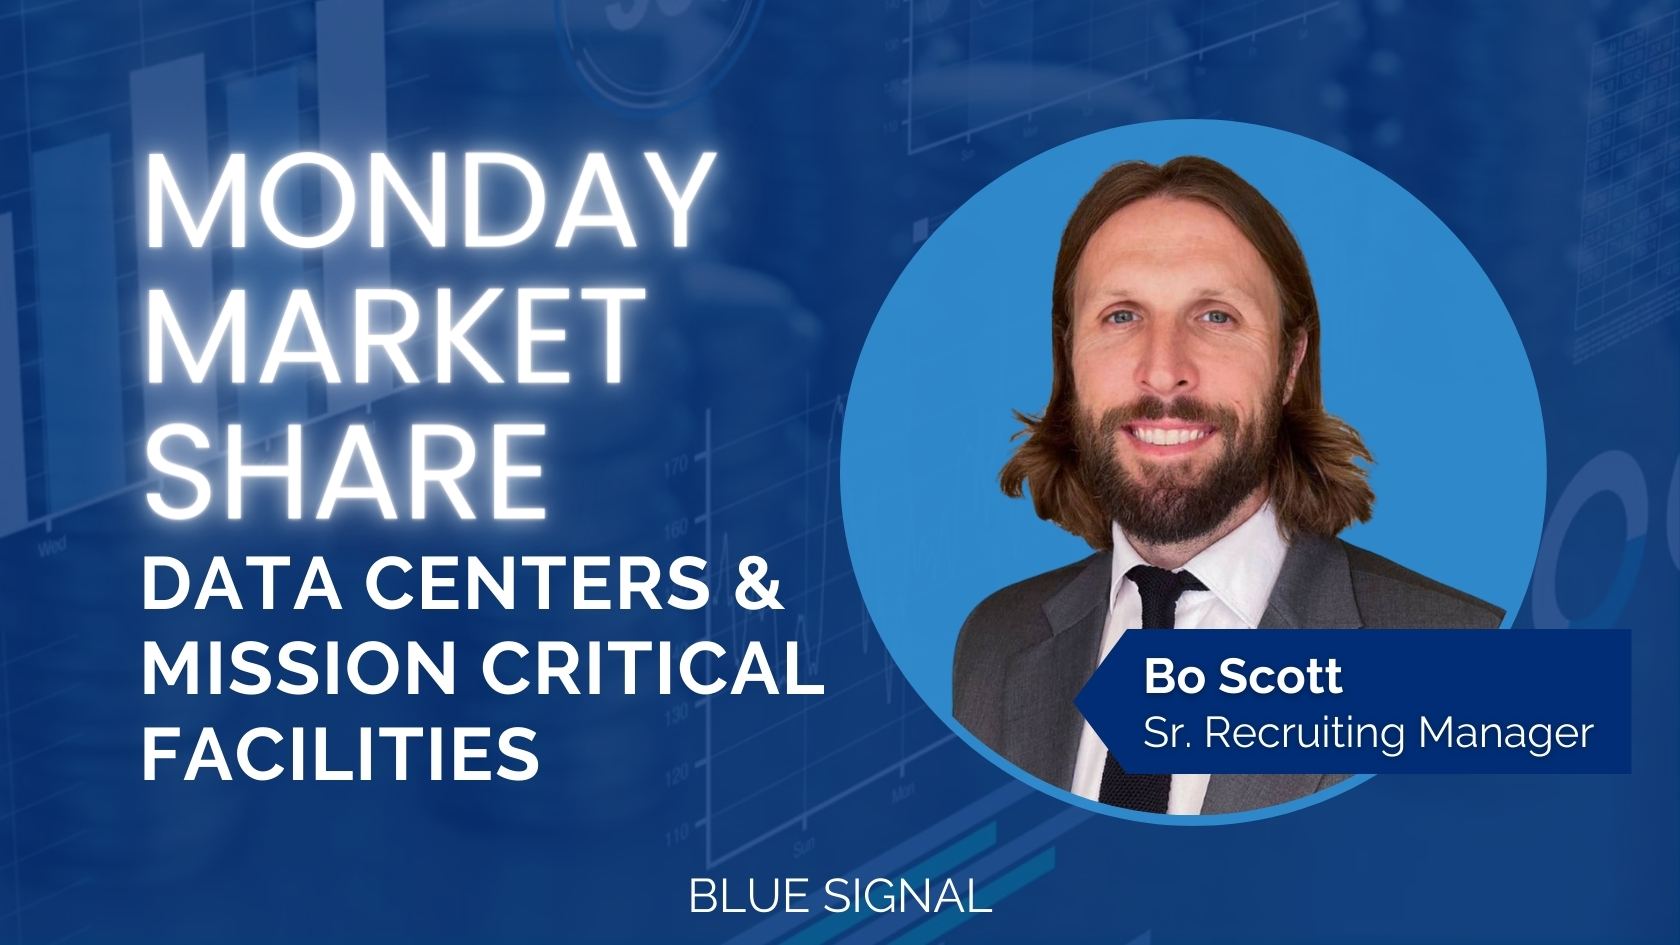 Bo Scott, Senior Recruiting Manager at Blue Signal, presented on Monday Market Share focusing on data centers and mission critical facilities.